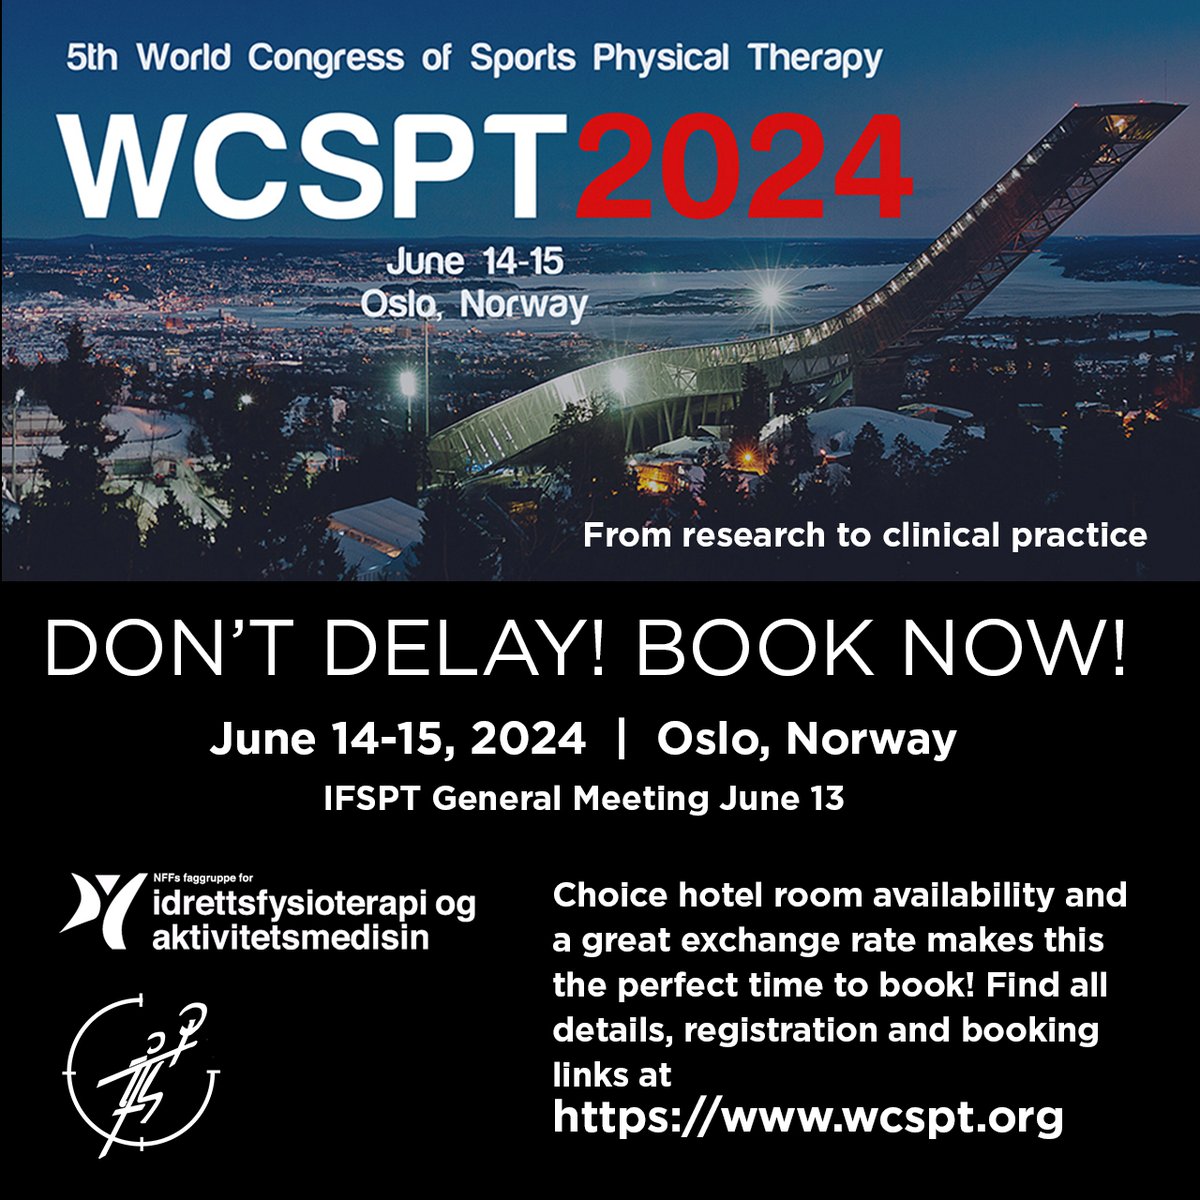 NOW IS THE TIME TO REGISTER! Join us in Oslo at the Fifth World Congress of Sports Physical Therapy, June 14-15! Follow this link: wcspt.org